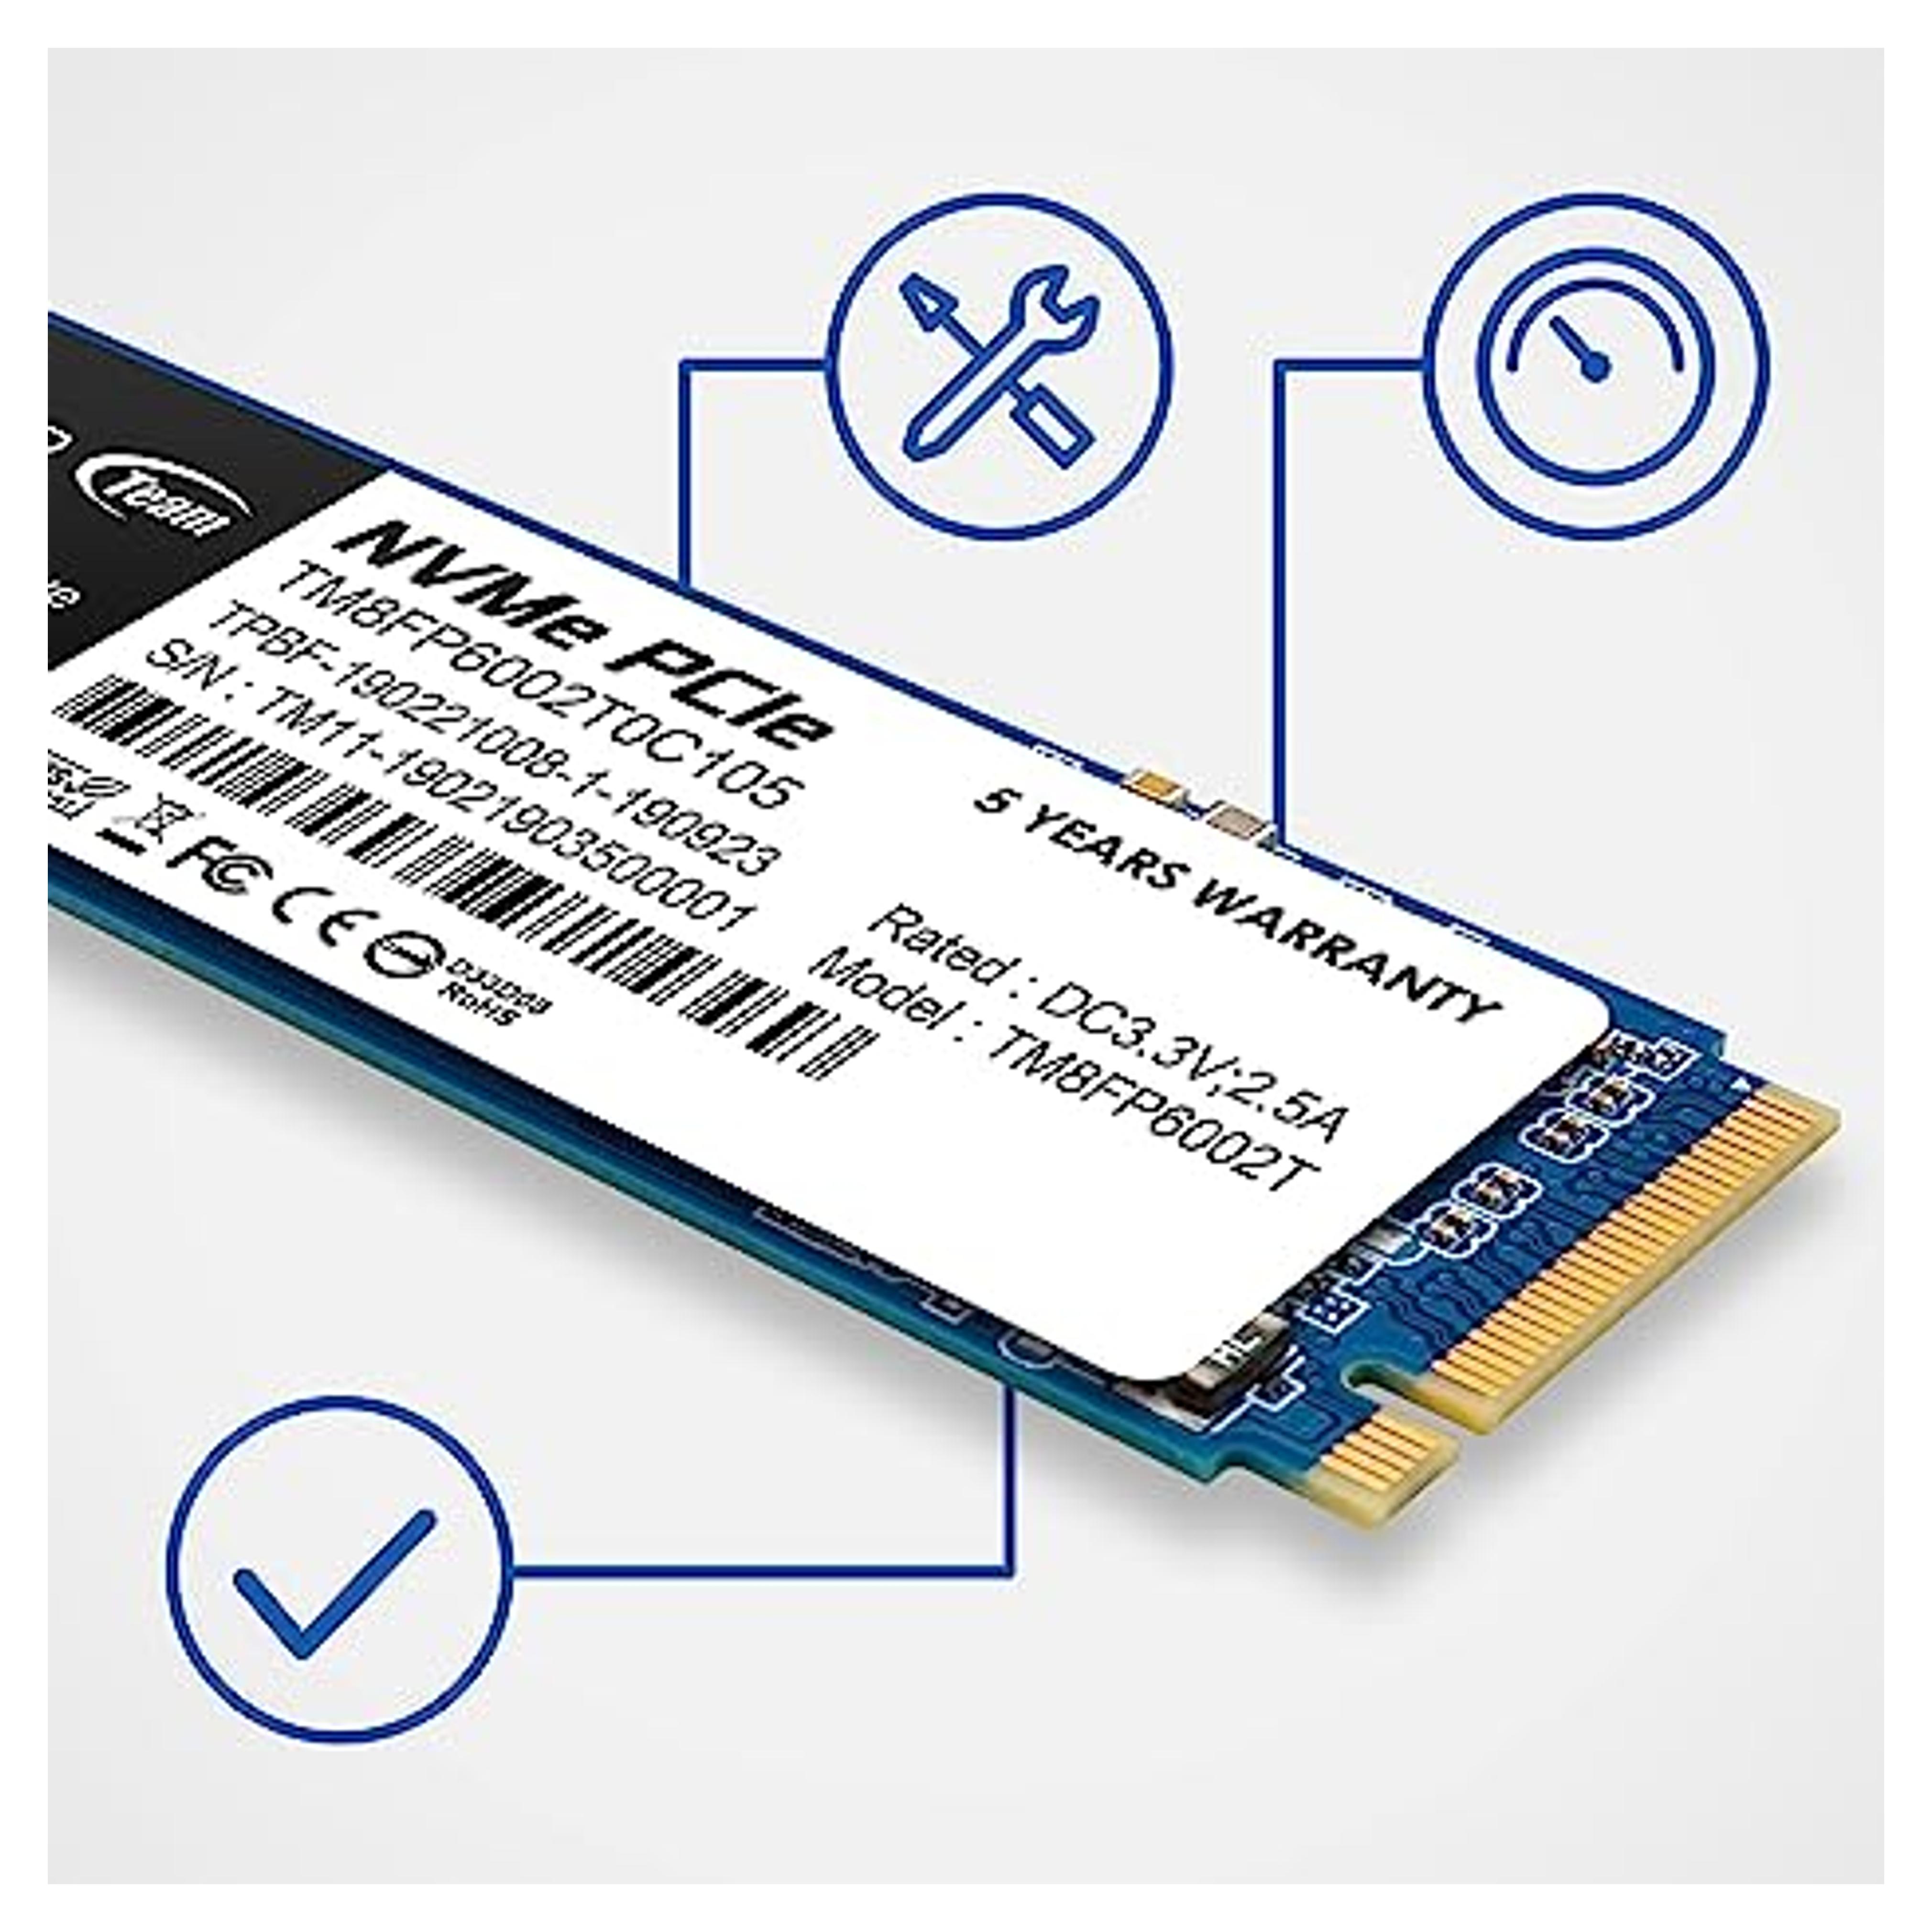 Amazon.com: TEAMGROUP MP33 512GB SLC Cache 3D NAND TLC NVMe 1.3 PCIe Gen3x4 M.2 2280 Internal Solid State Drive SSD (Read/Write Speed up to 1,700/1,400 MB/s) Compatible with Laptop & PC Desktop TM8FP6512G0C101 : Electronics